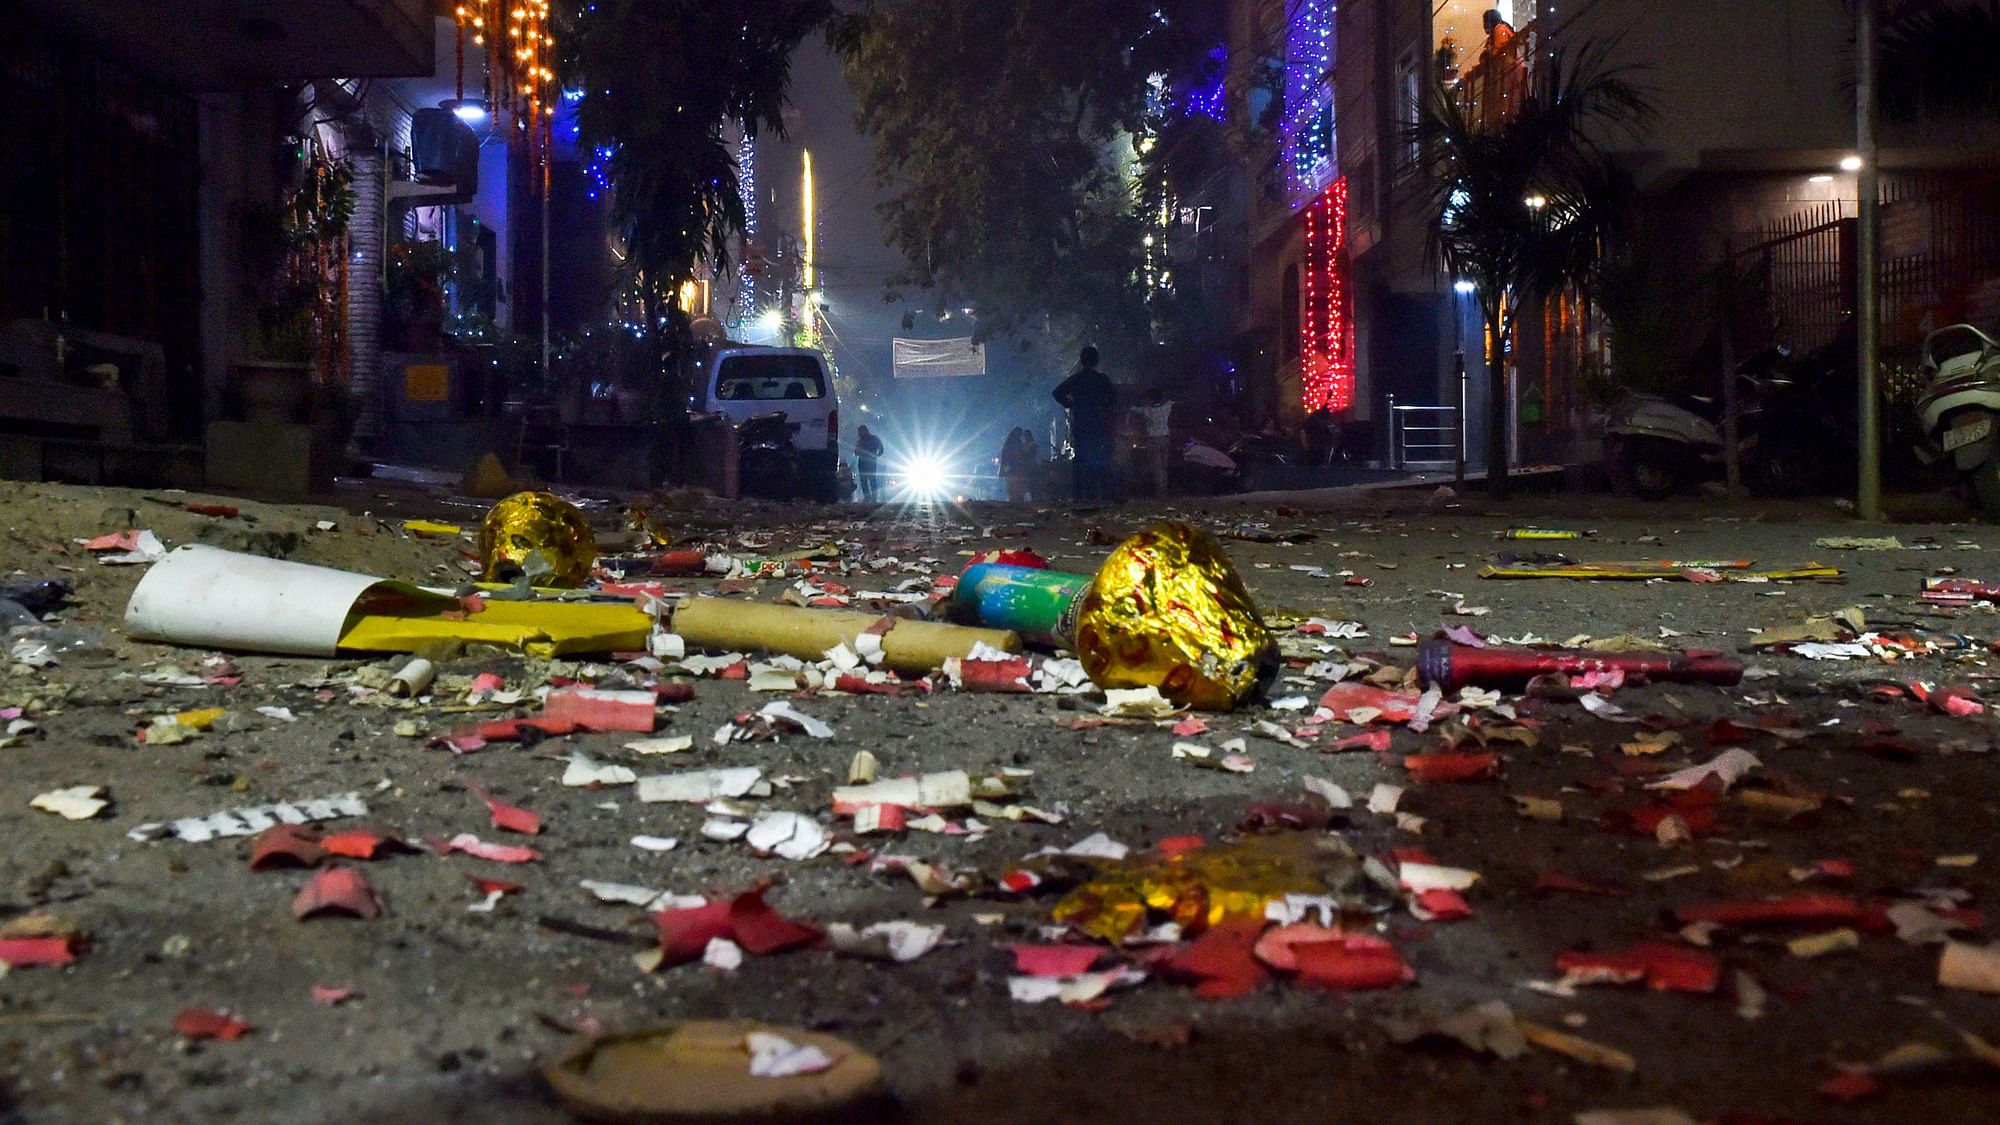 A view of a street littered with firecracker waste. Image used for representational purposes.